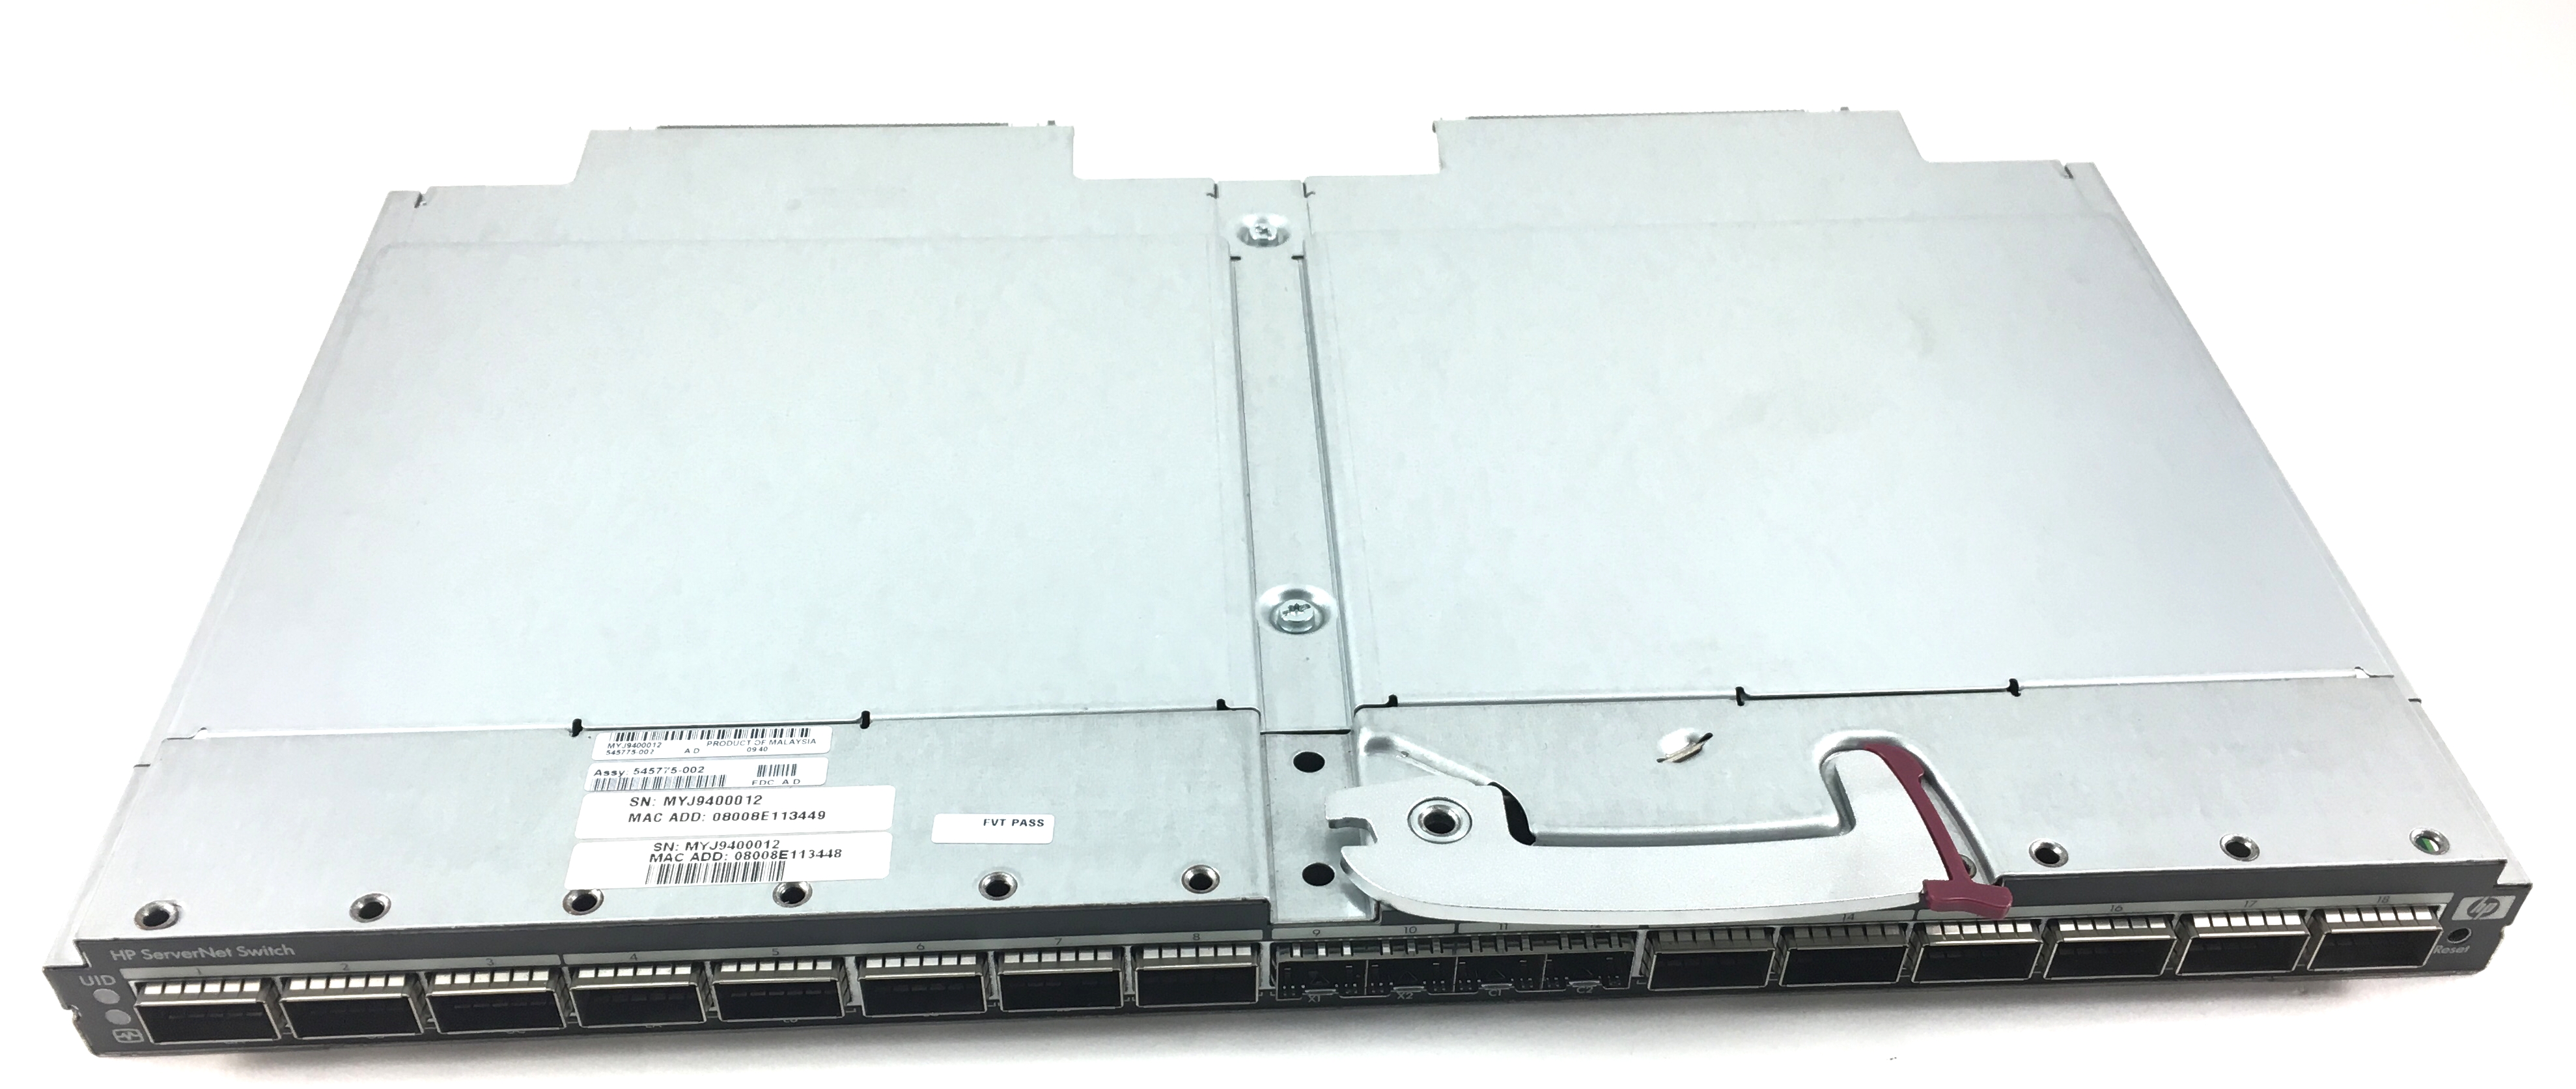 HP BLC C-Class Servernet Inifiniband Module Switch (545775-002)